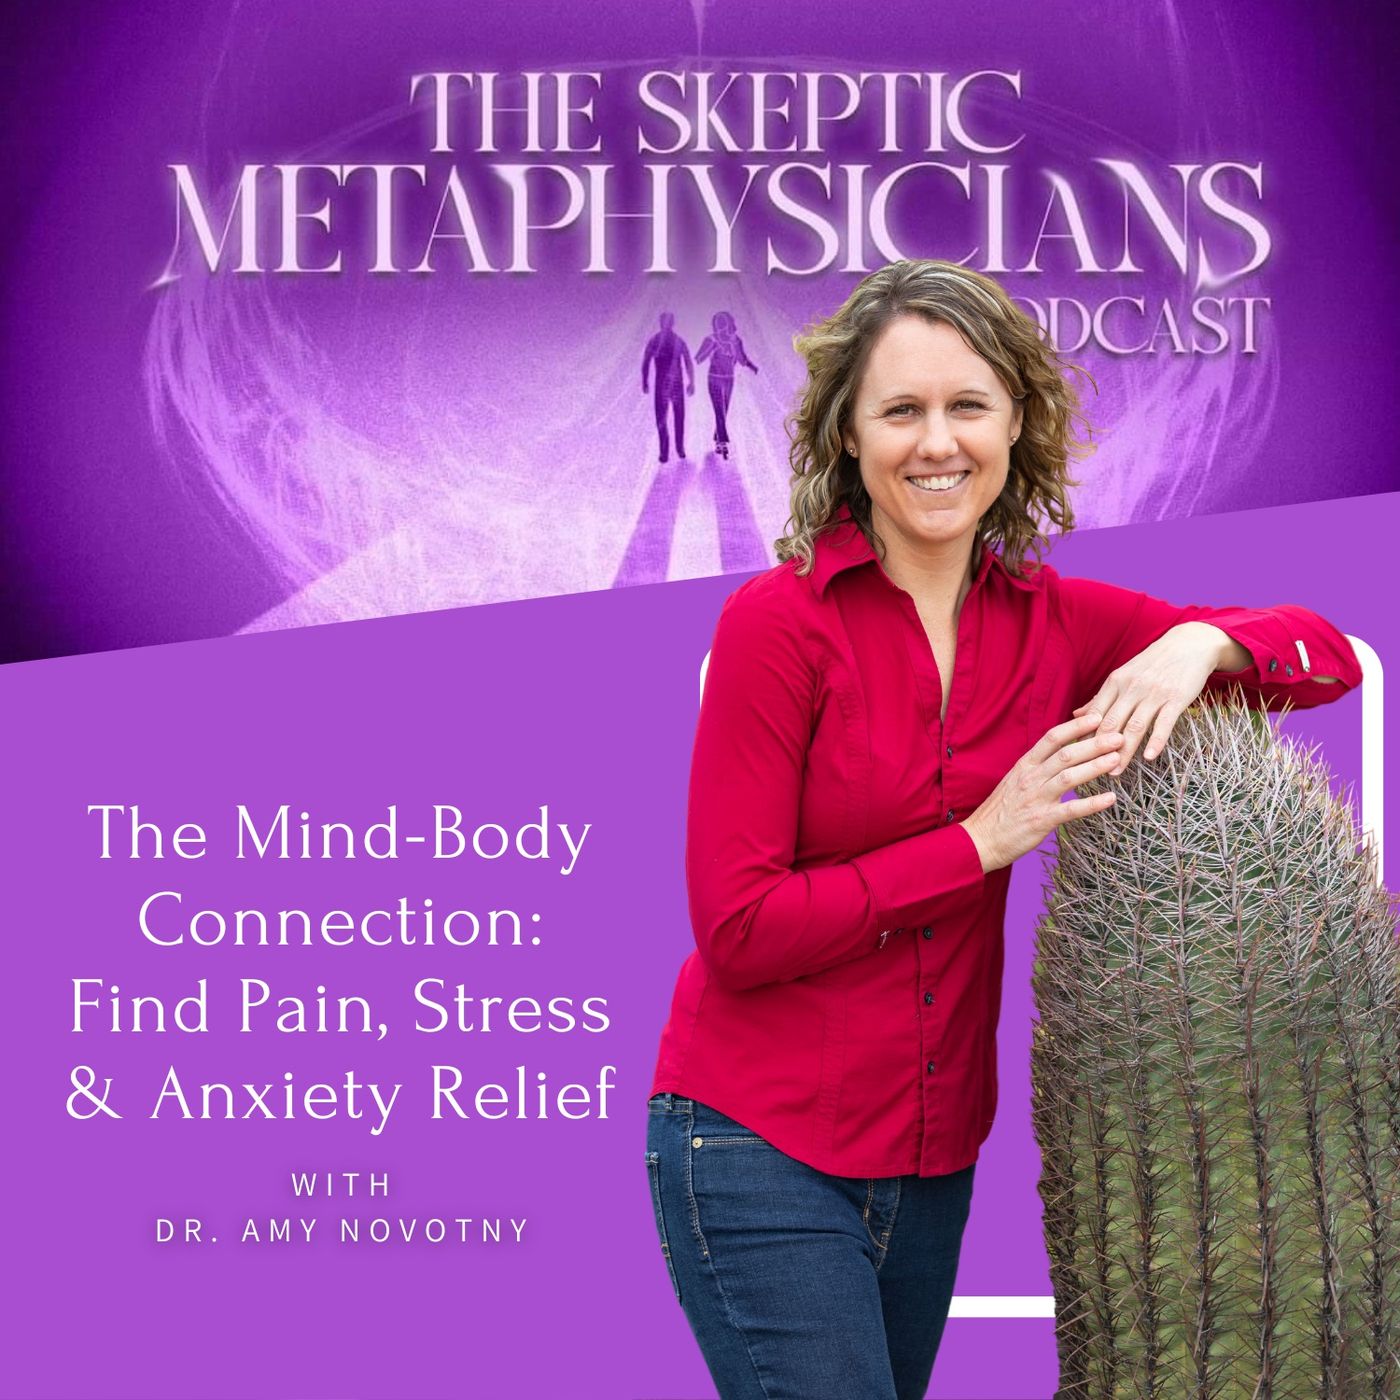 The Mind-Body Connection: Find Pain, Stress & Anxiety Relief | Dr Amy Novotny Image